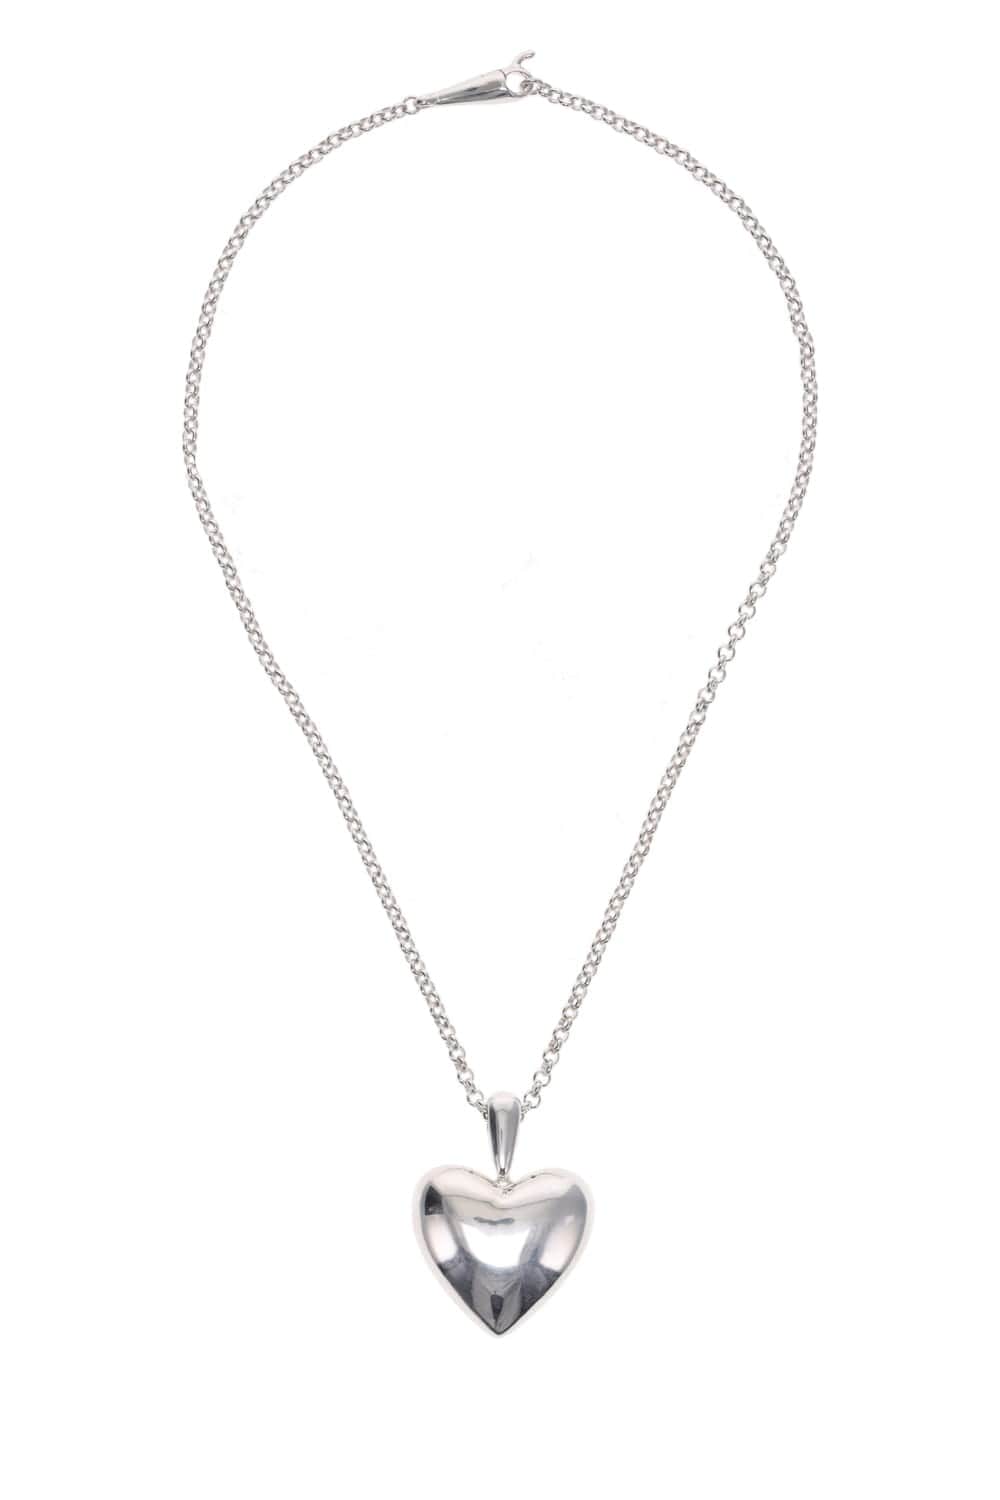 Annika Inez Voloptuous Heart Necklace XL 591 STERLING SILVER